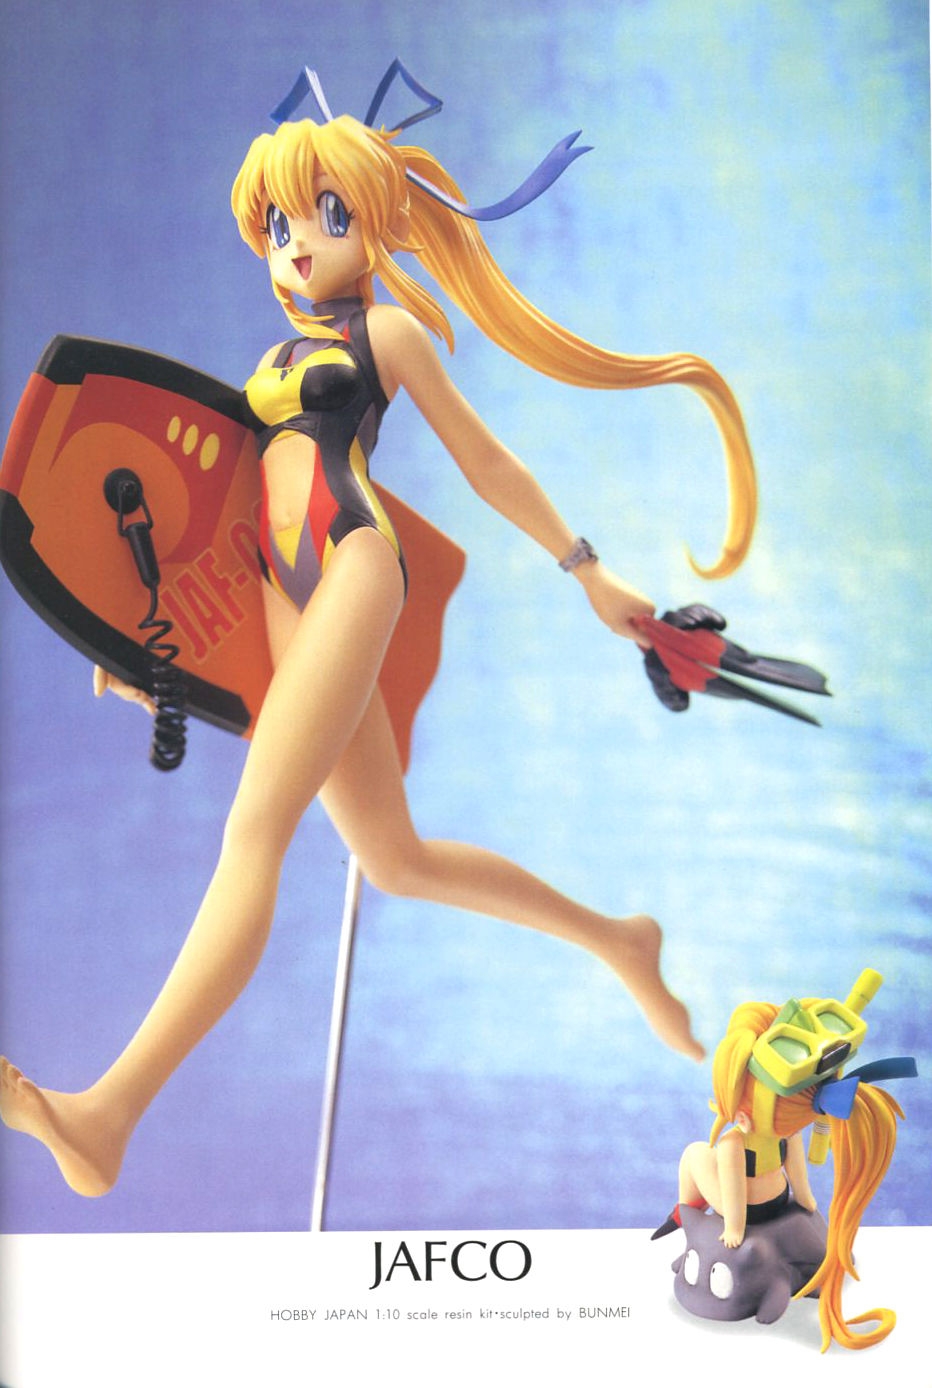 Hobby Japan Mook All That Figure 2001 92